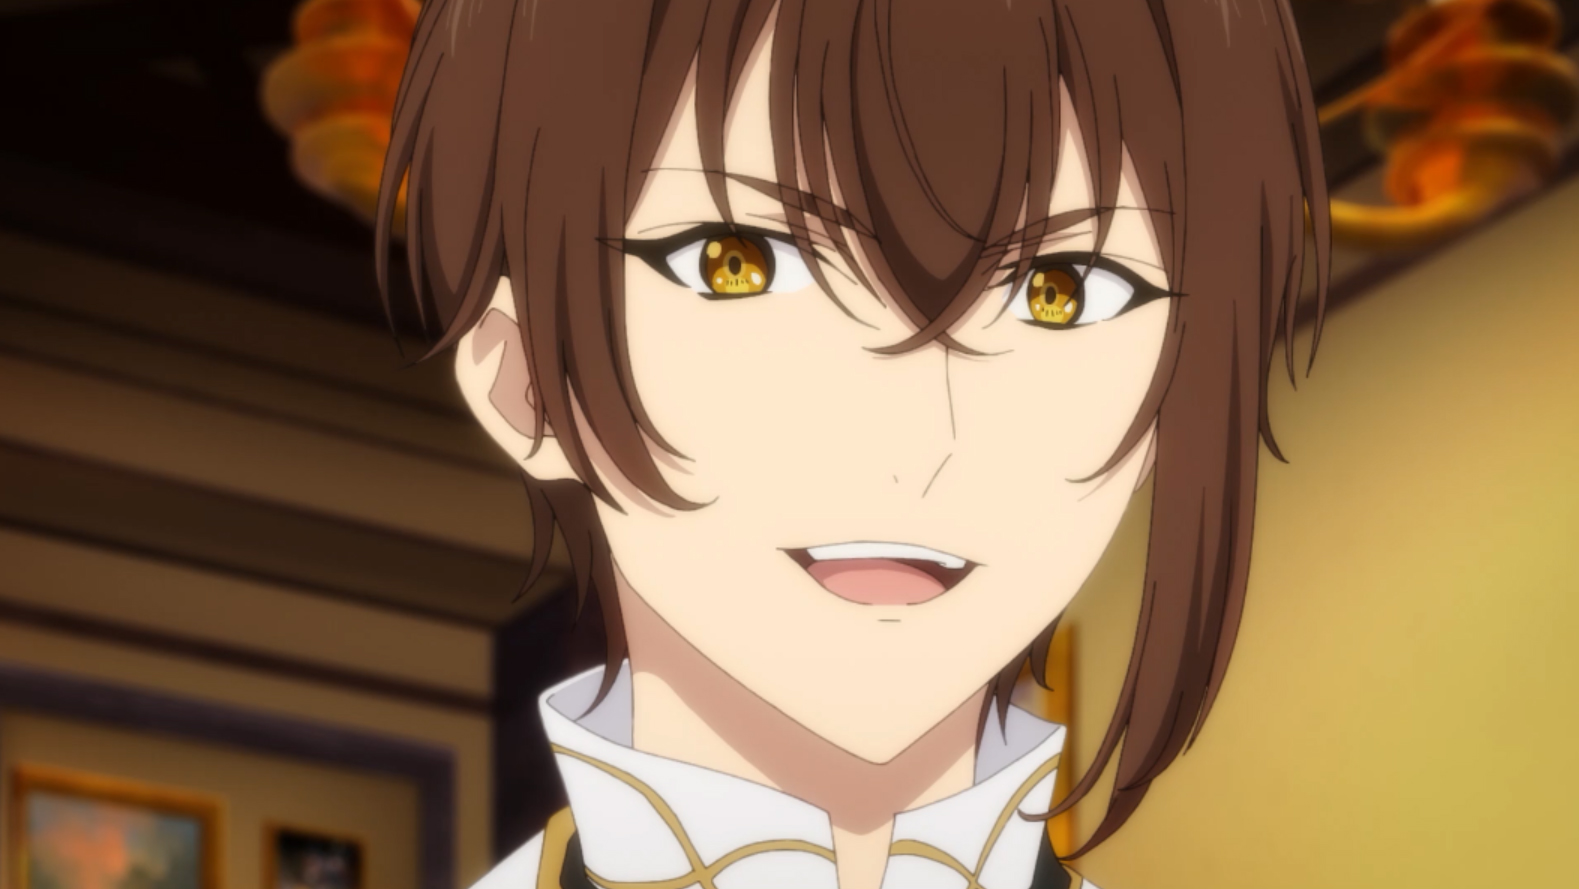 Prince Wein smirks and schemes in a scene from The Genius Prince's Guide to Raising a Nation Out of Debt TV anime.